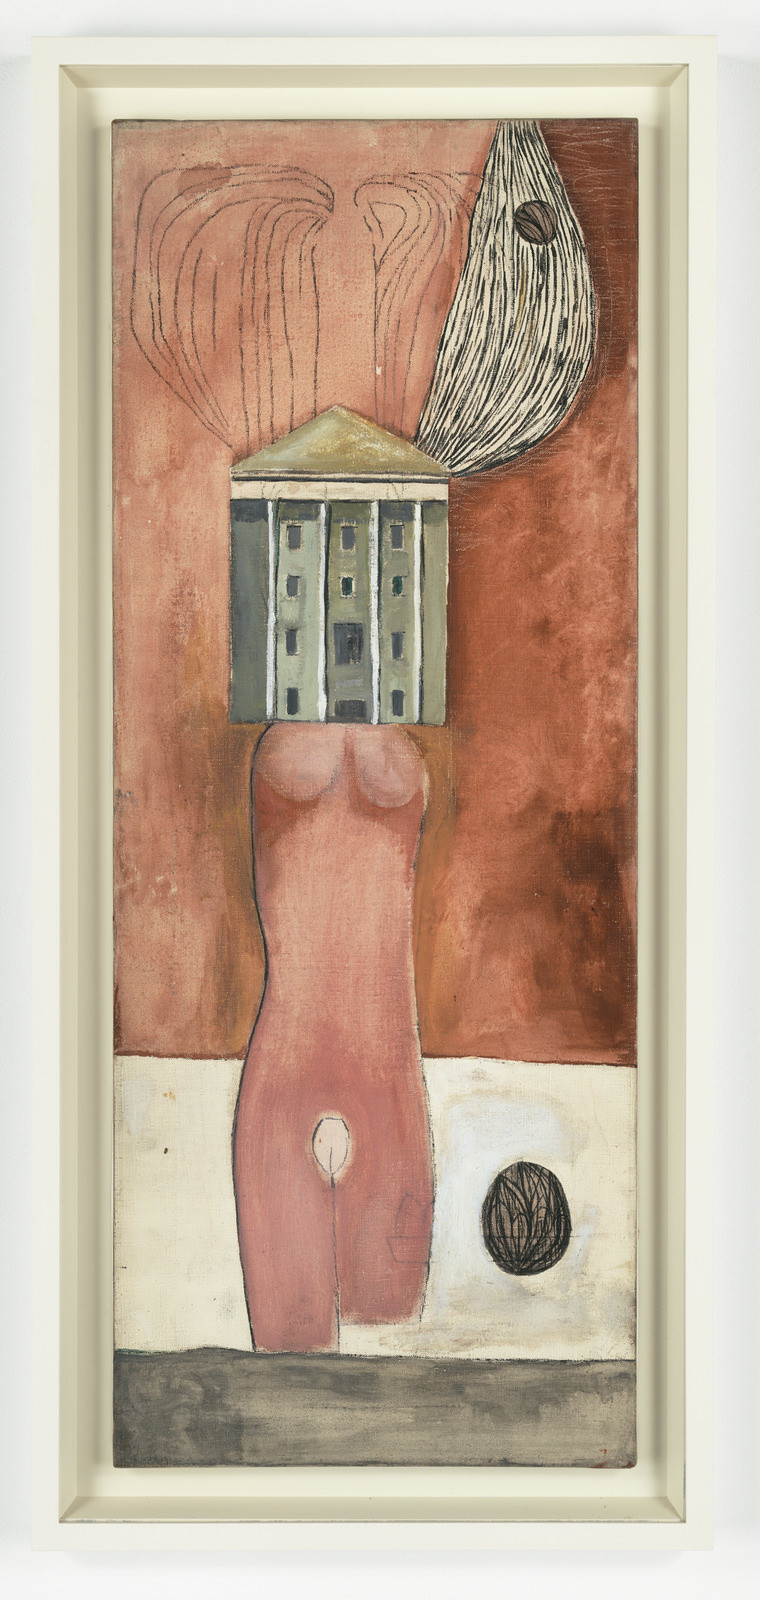 _Femme Maison,_ 1946-47. Oil and ink on linen. Collection Louise Bourgeois Trust, New York. © 2017 The Easton Foundation/Licensed by VAGA, NY. LN2017.745